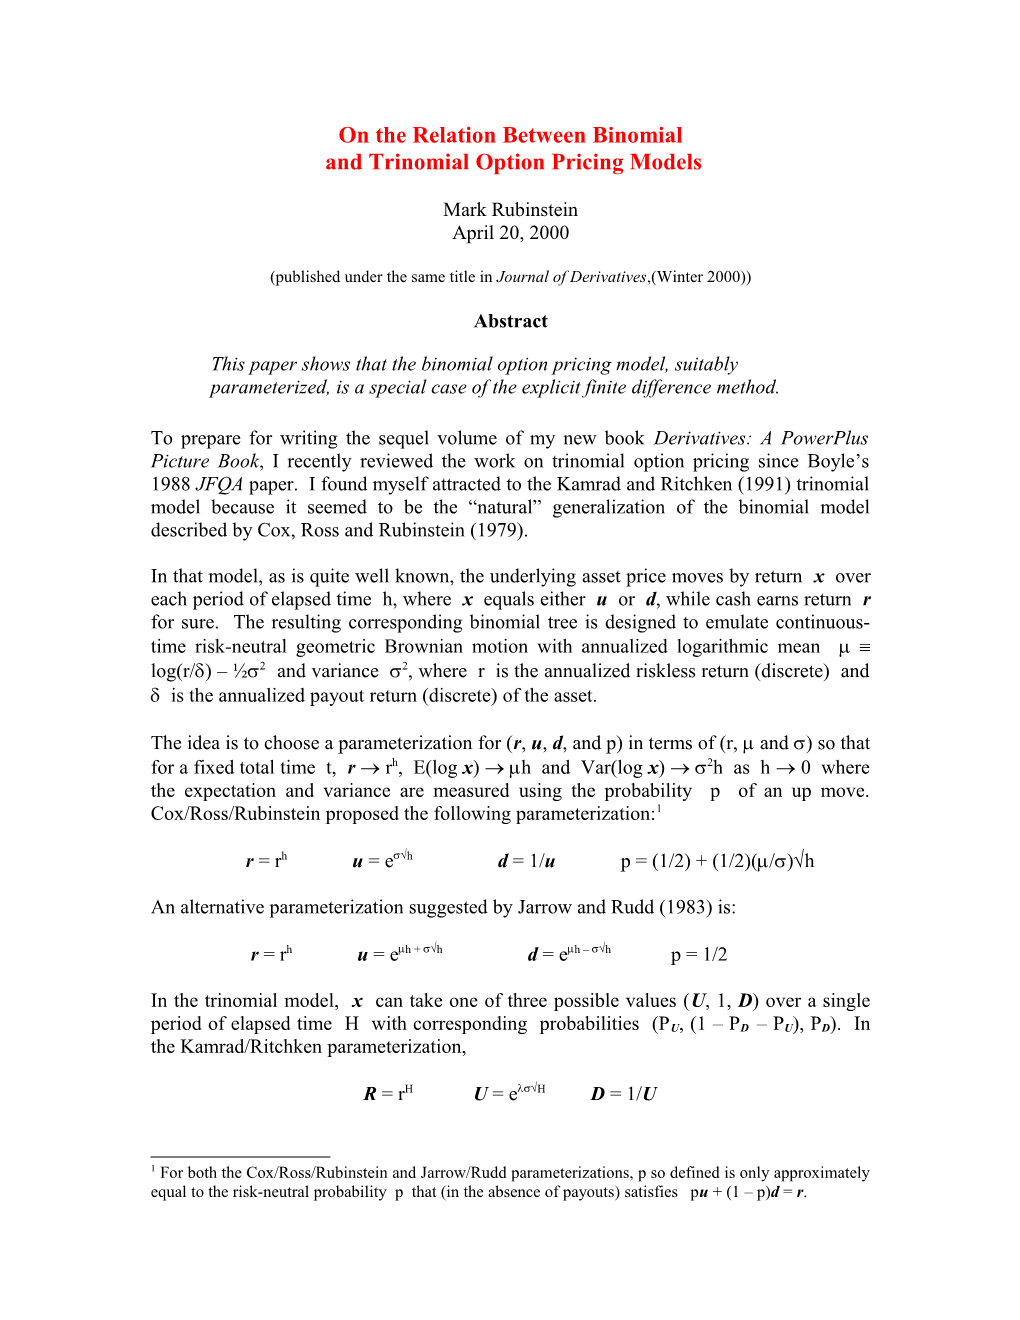 On the Relation of Binomial and Trinomial Option Pricing Models